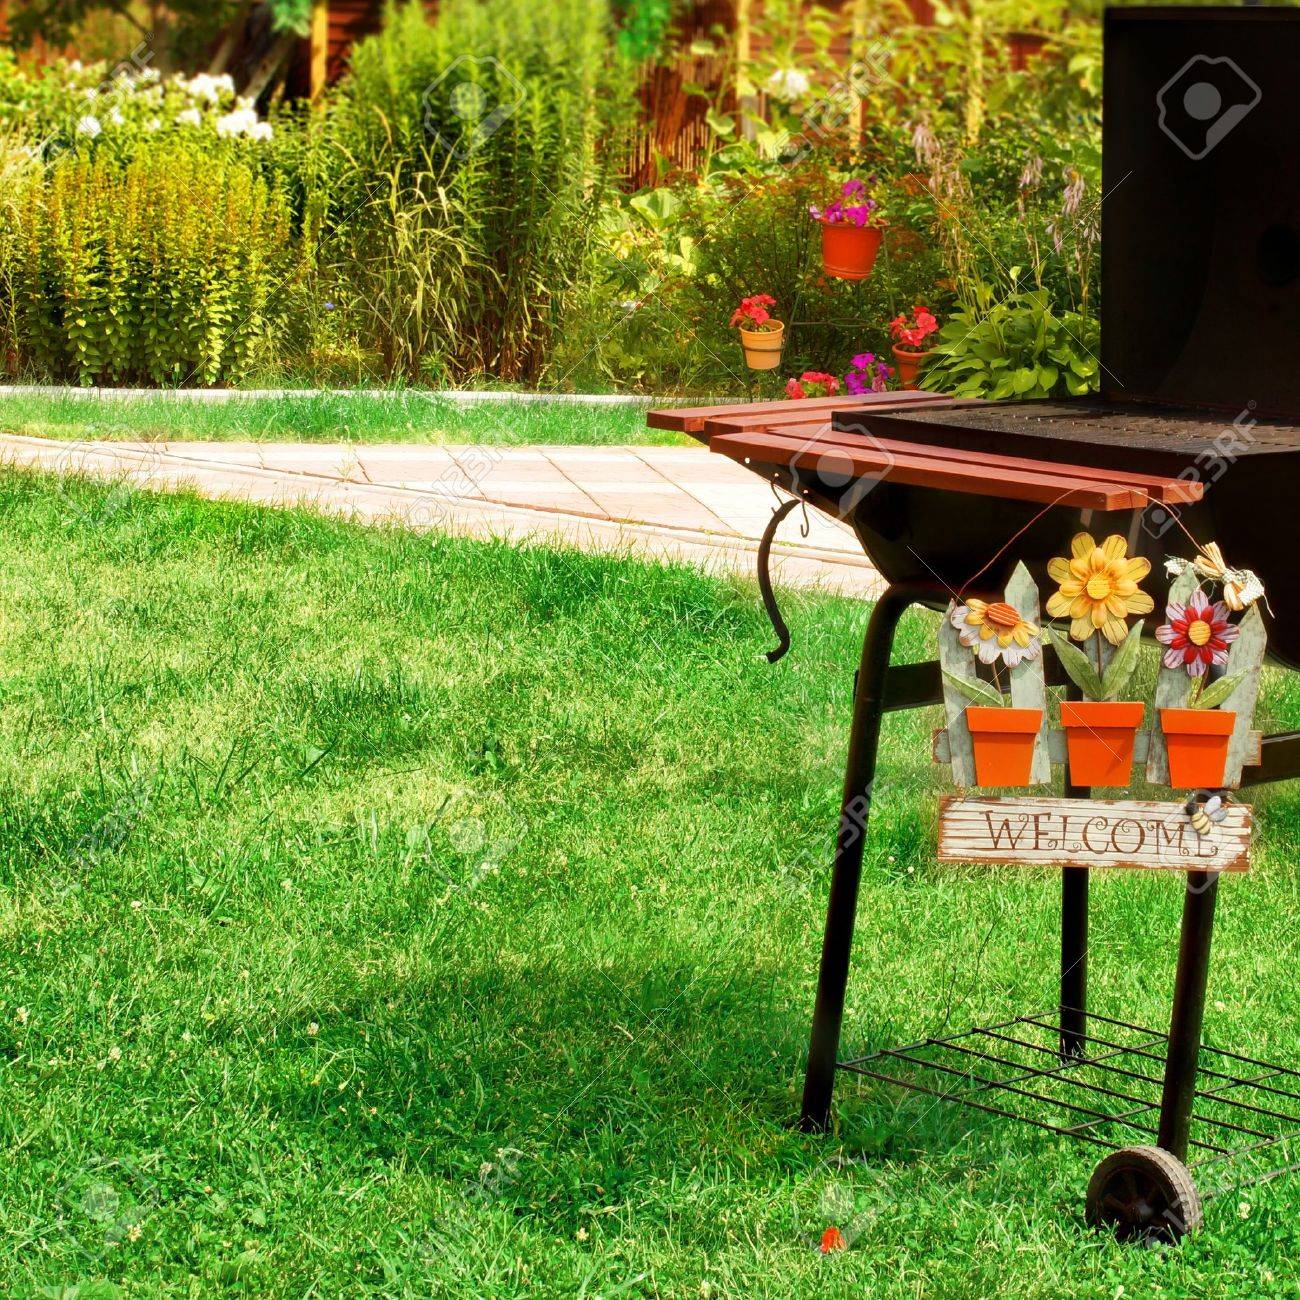 Bbq Grill And Wele Sign In The Backyard Background With Space